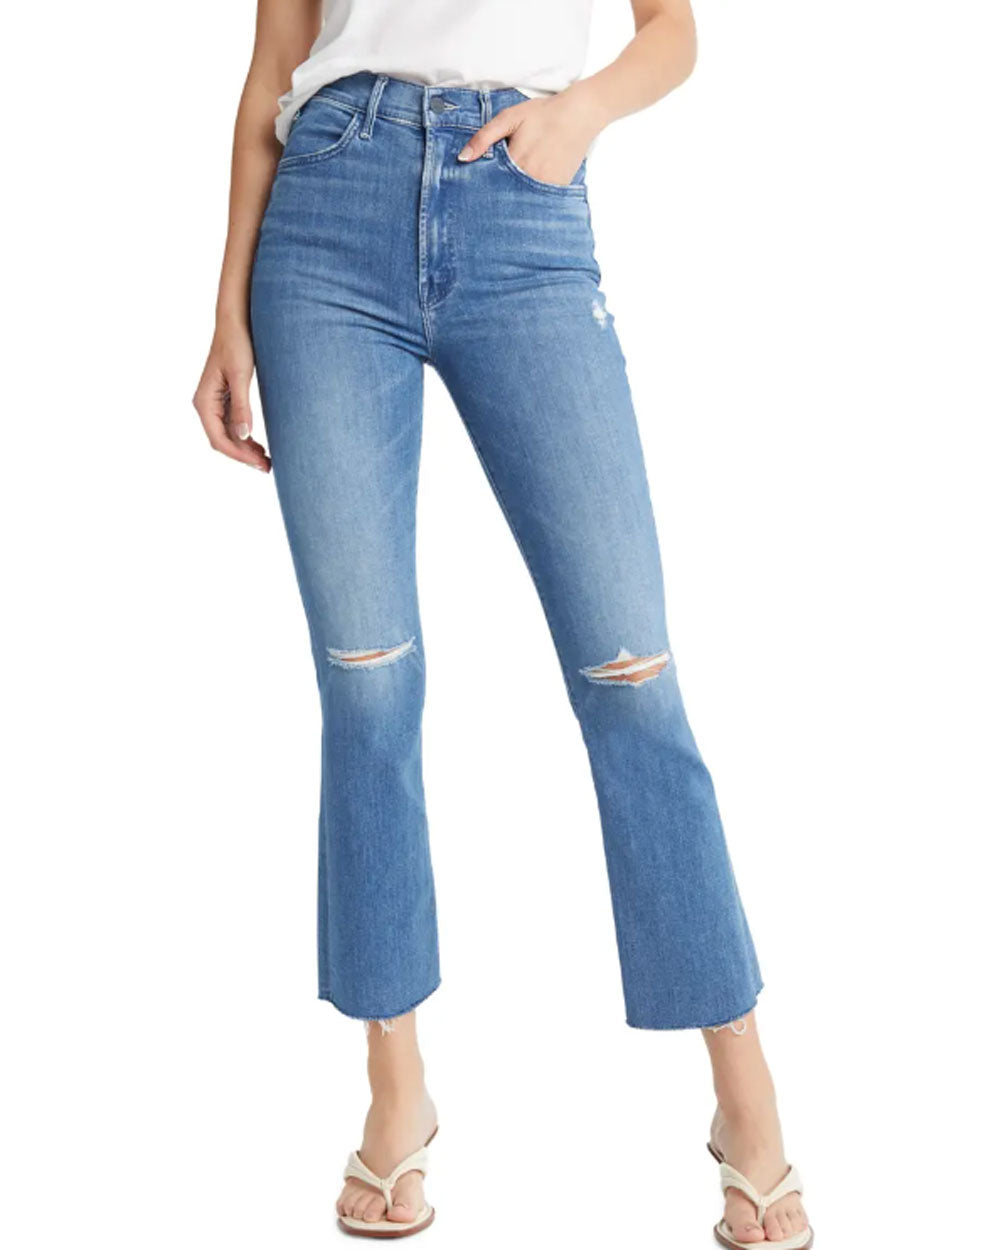 The Hustler Ankle Fray Jean in Can’t Stop Staring